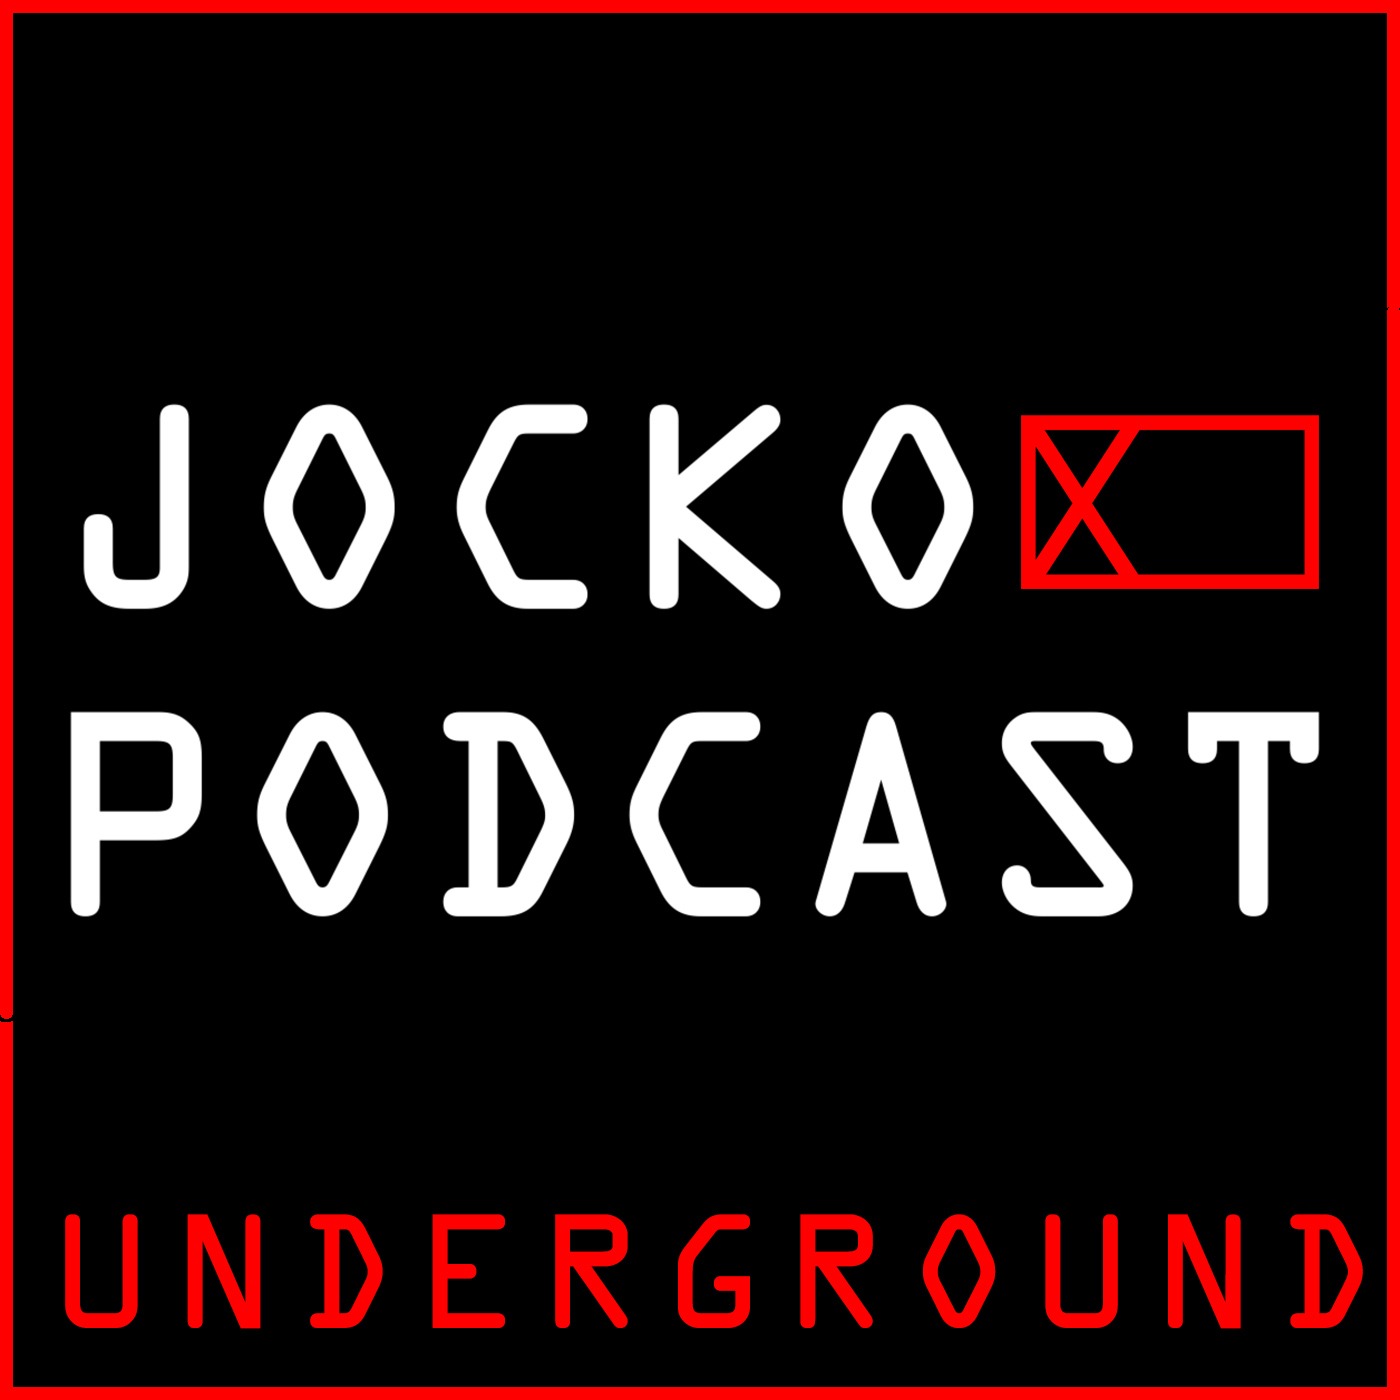 Jocko Underground: It's Time To Reset. New Authority, How to Motivate The Unmotivated